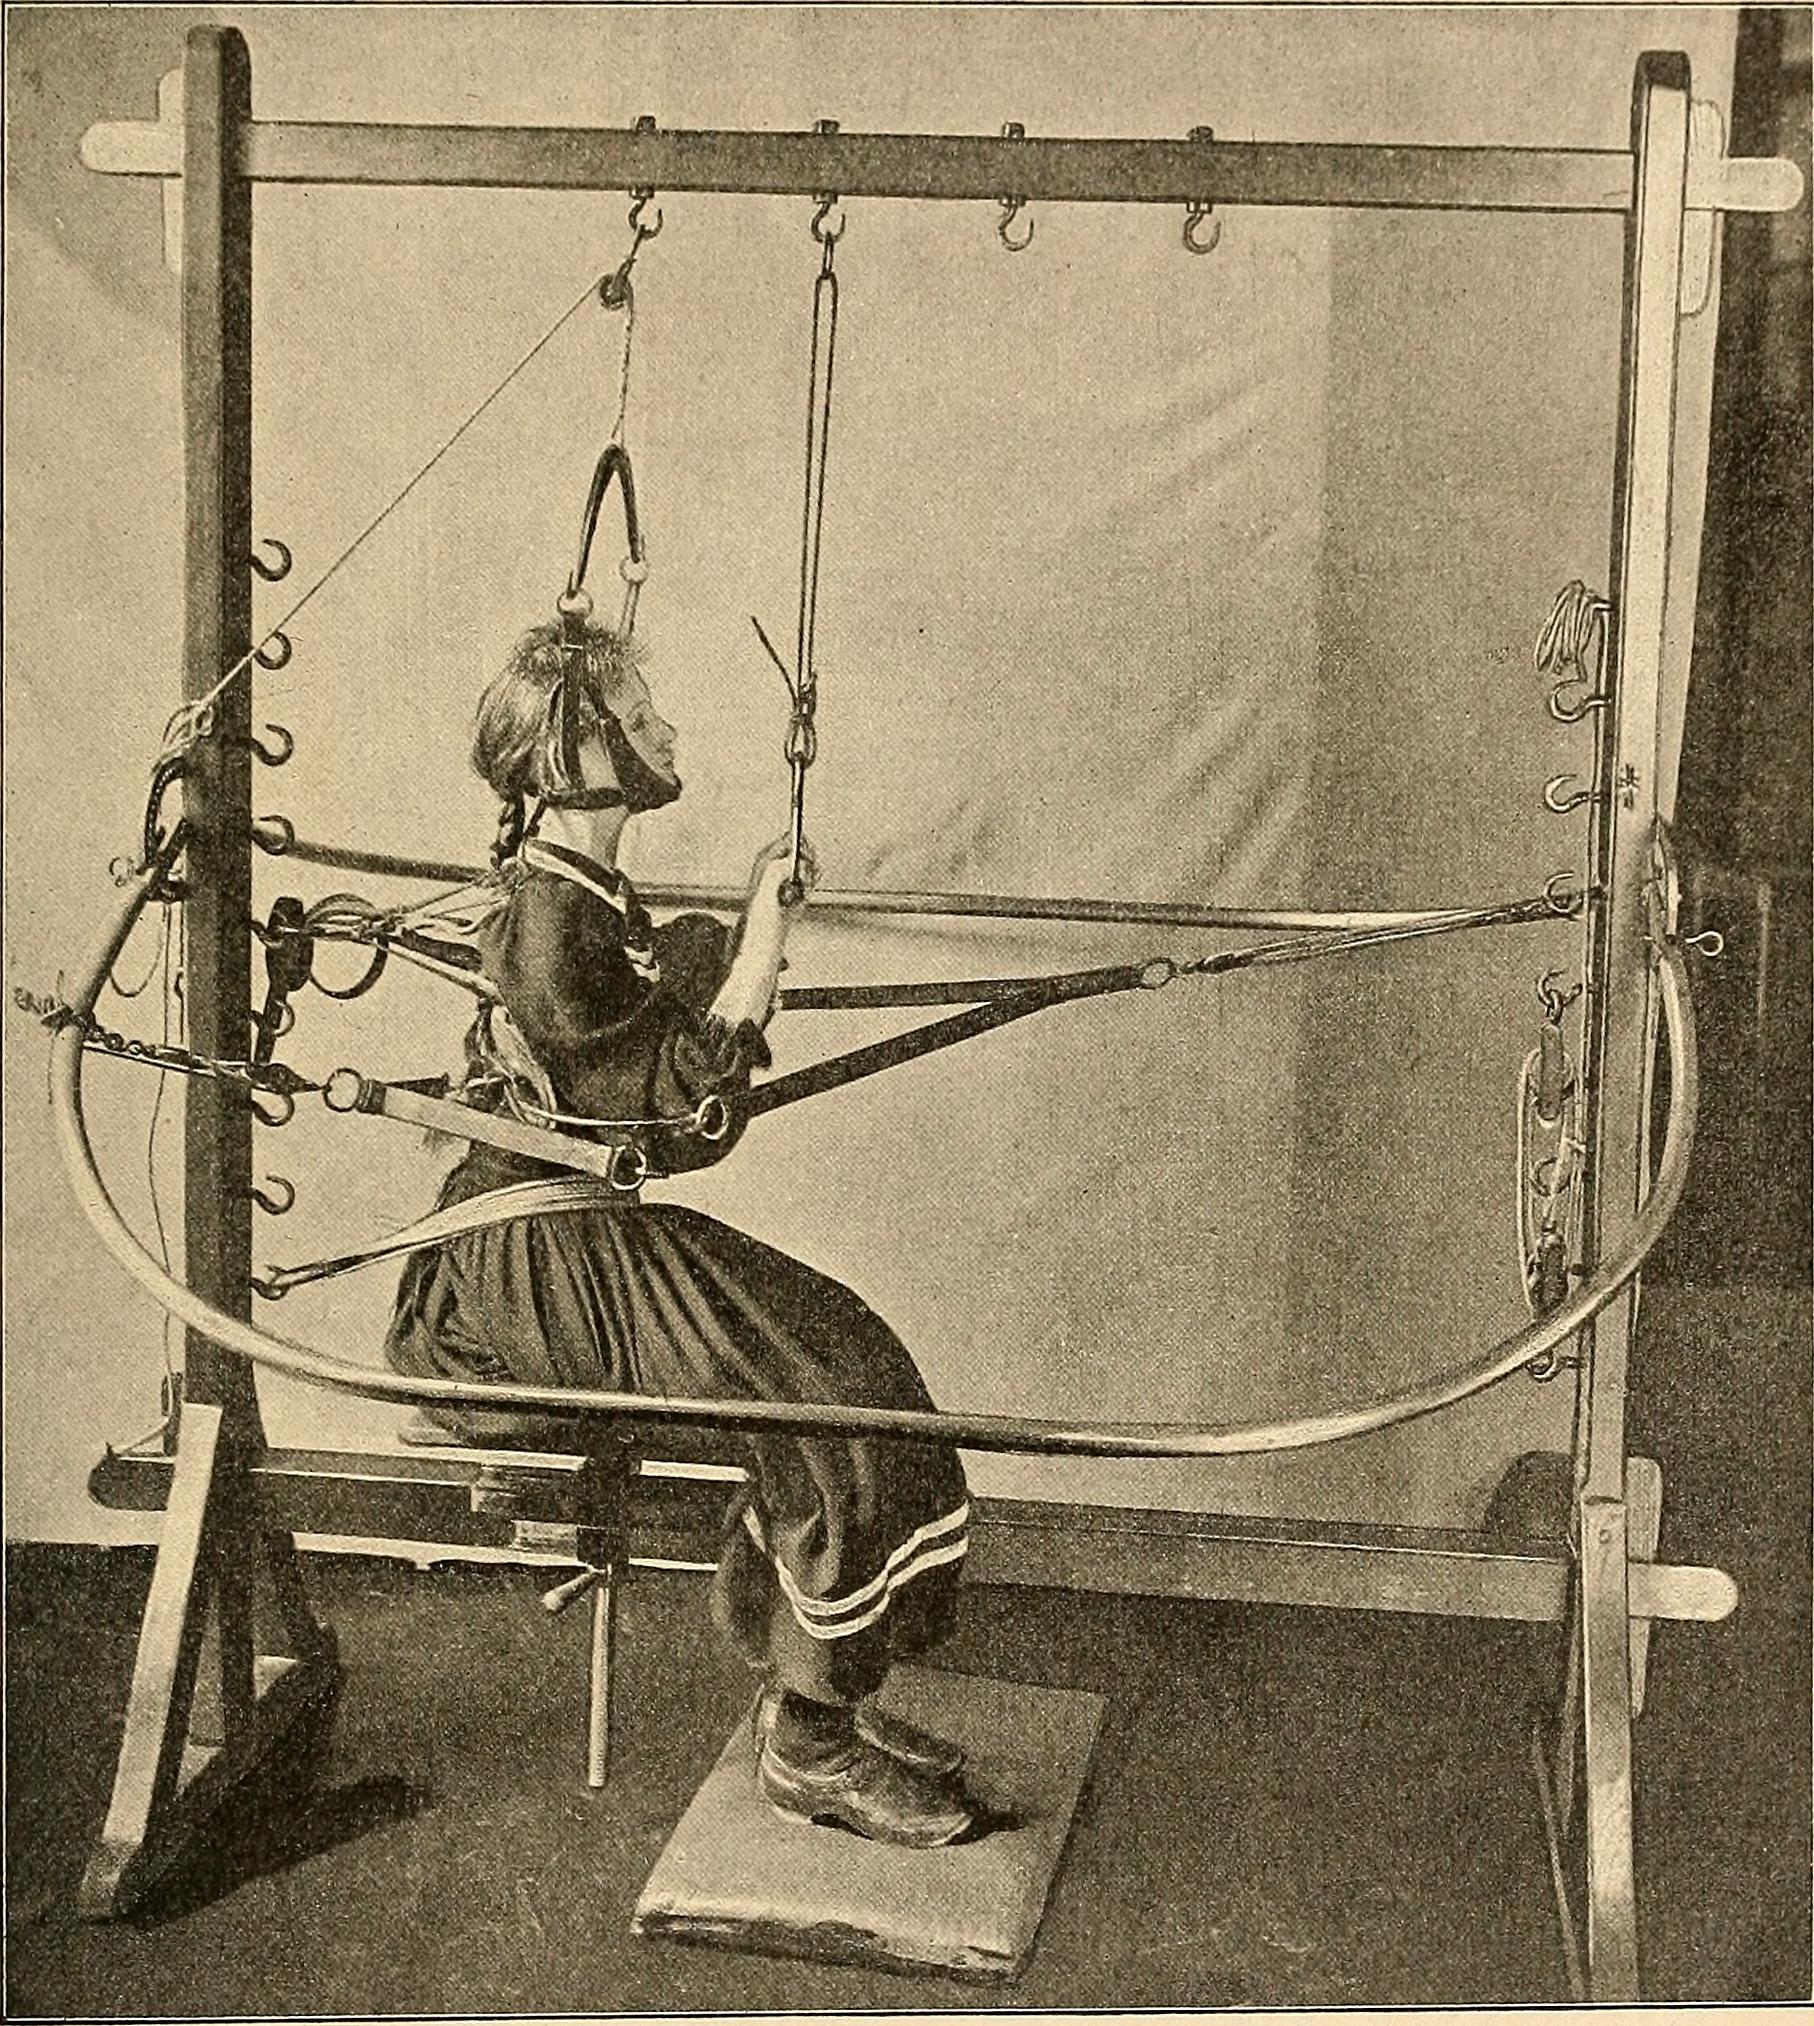 File:Scoliosis Historical Treatment.jpg